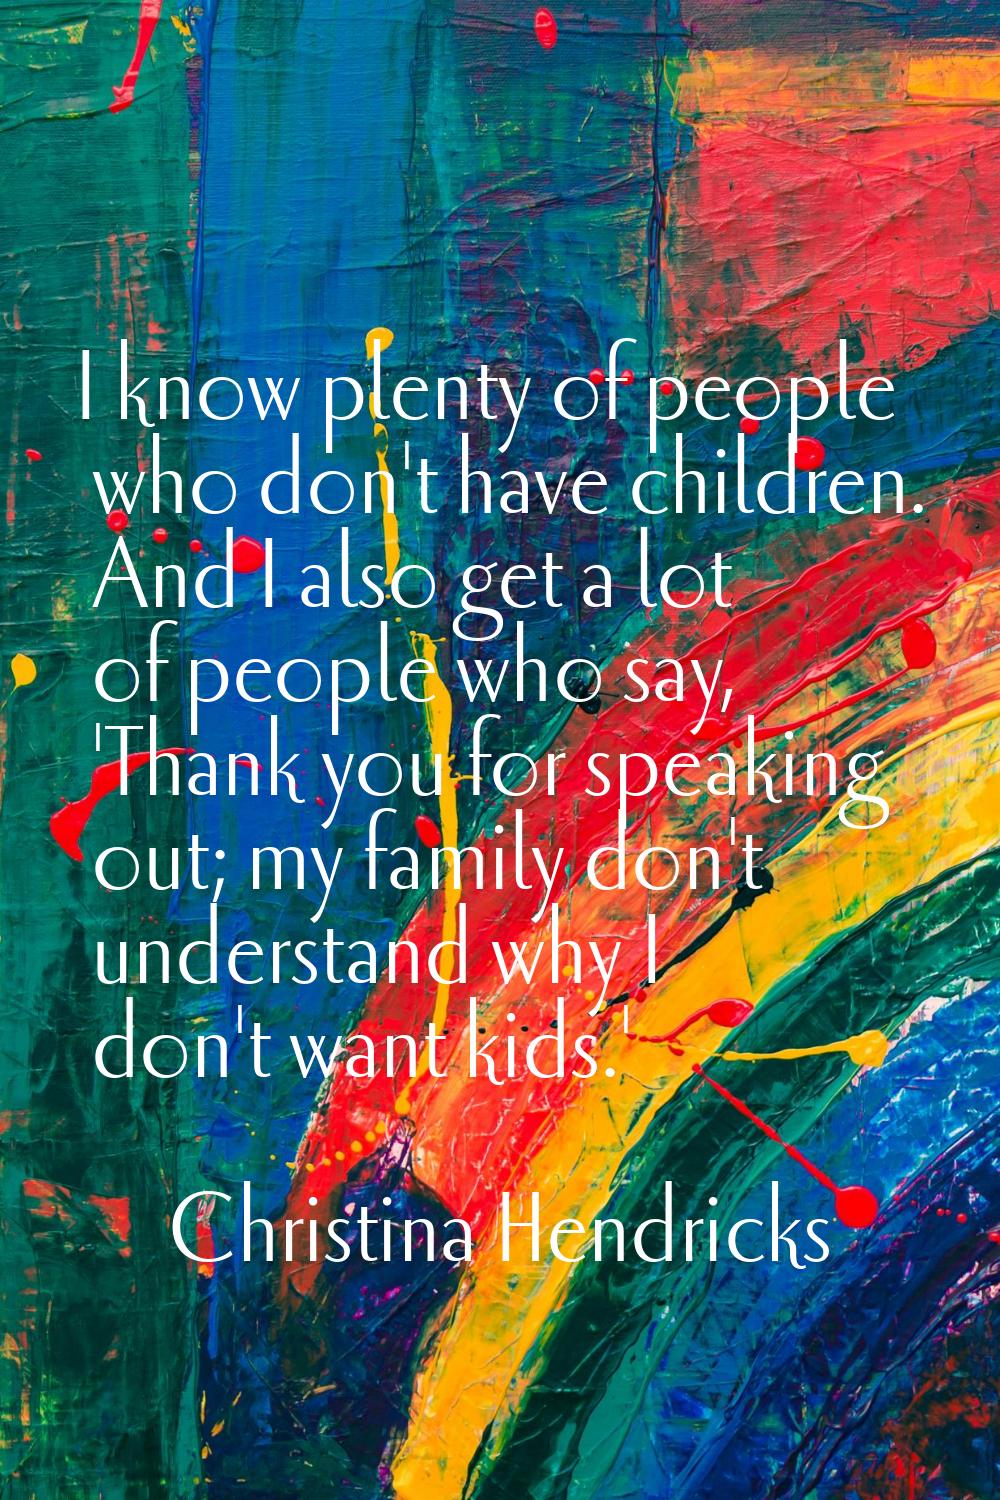 I know plenty of people who don't have children. And I also get a lot of people who say, 'Thank you